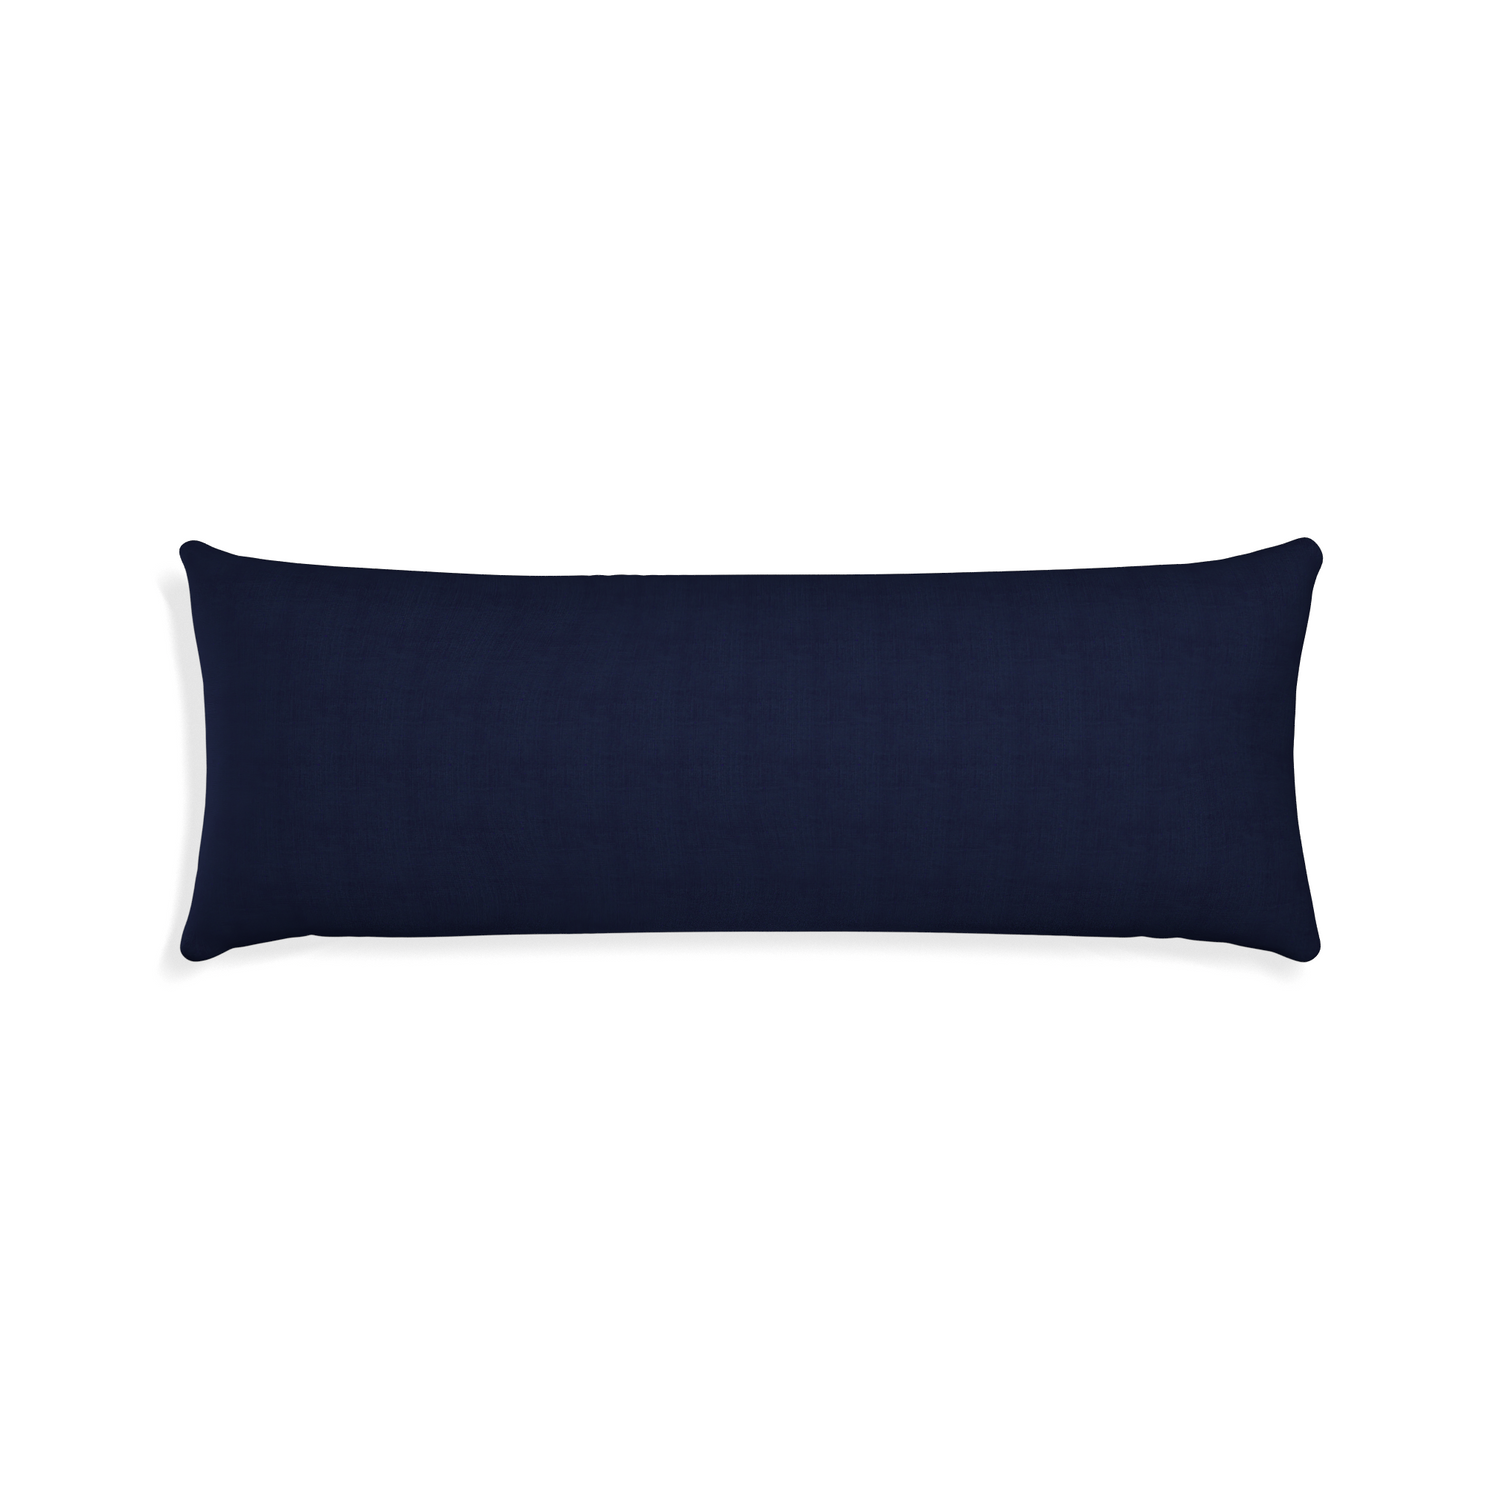 Xl-lumbar midnight custom navy bluepillow with none on white background